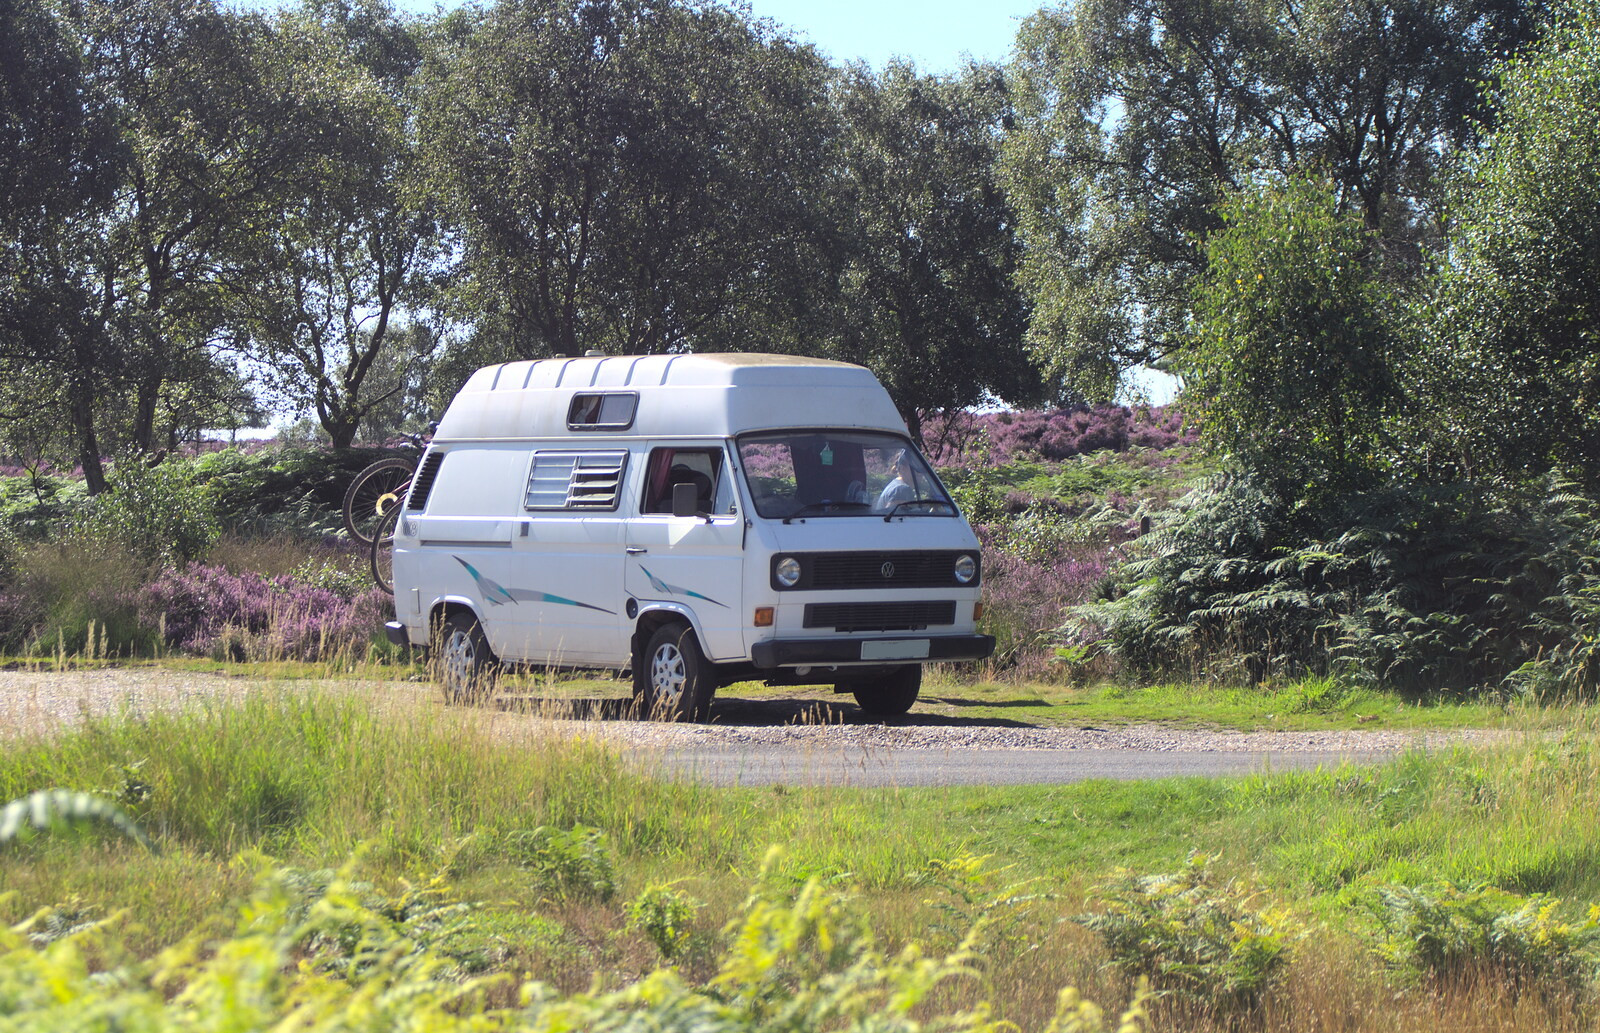 The van parked up on Dunwich Heath from Camping by the Seaside, Cliff House, Dunwich, Suffolk - 15th August 2012